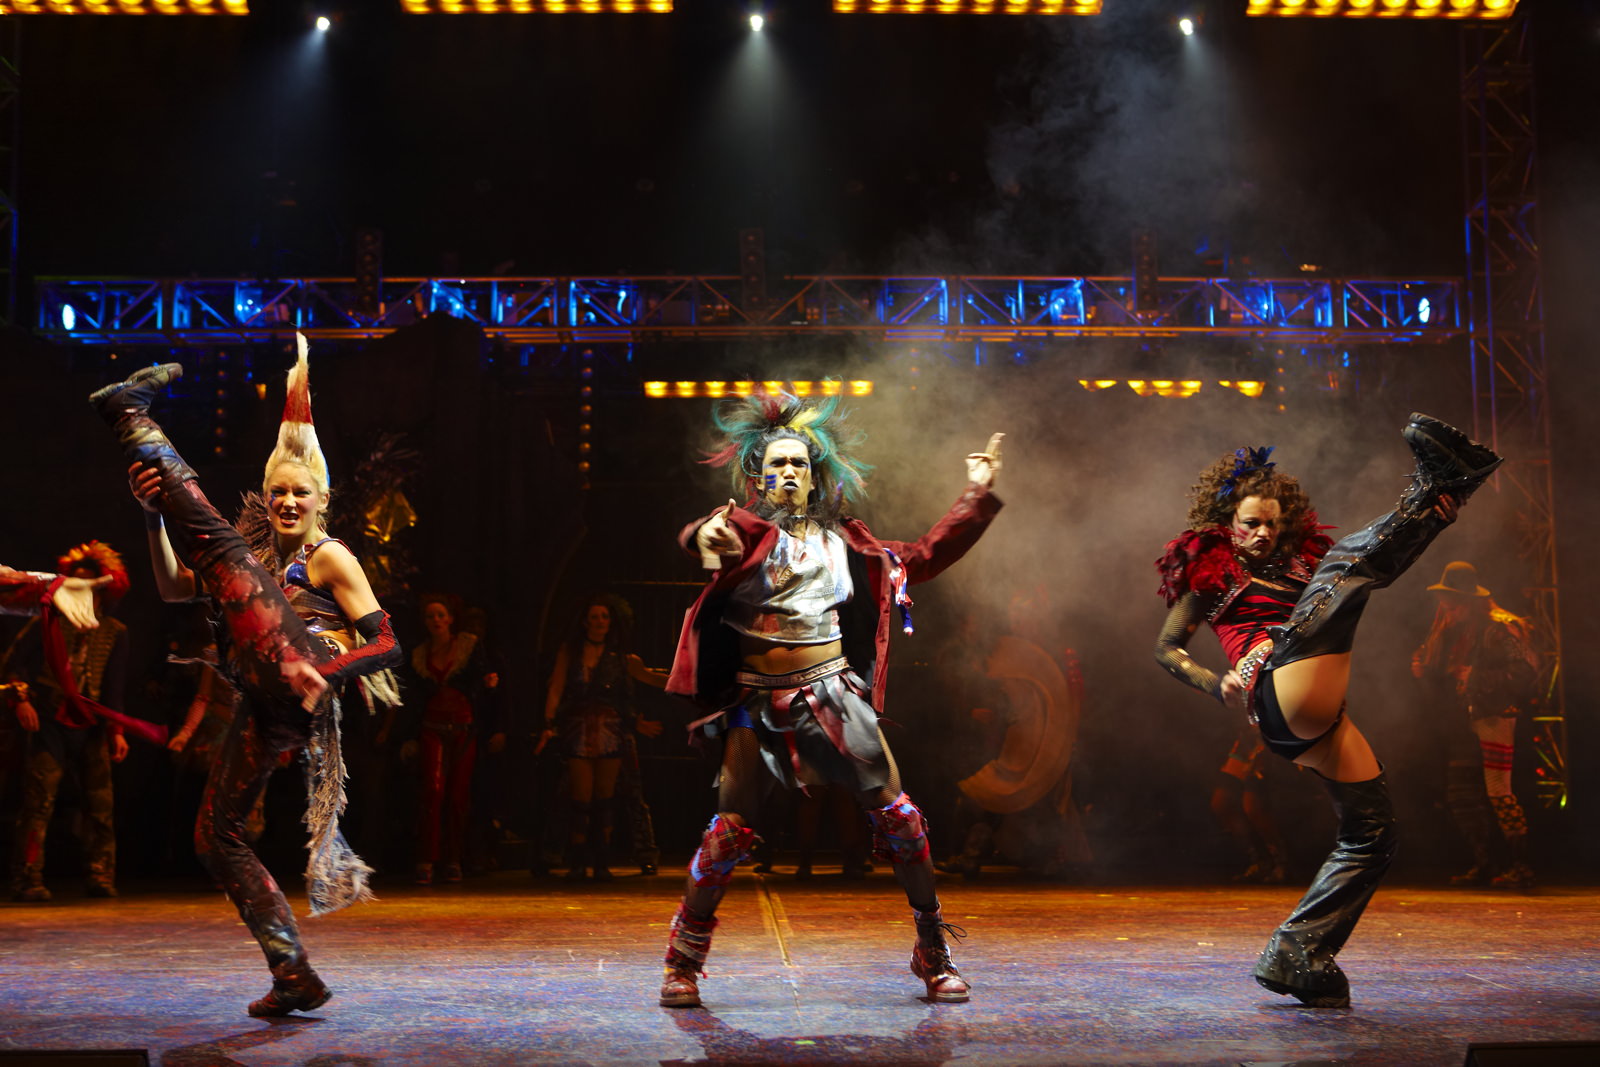   We Will Rock You  , UK Tour, Manchester, 2009 